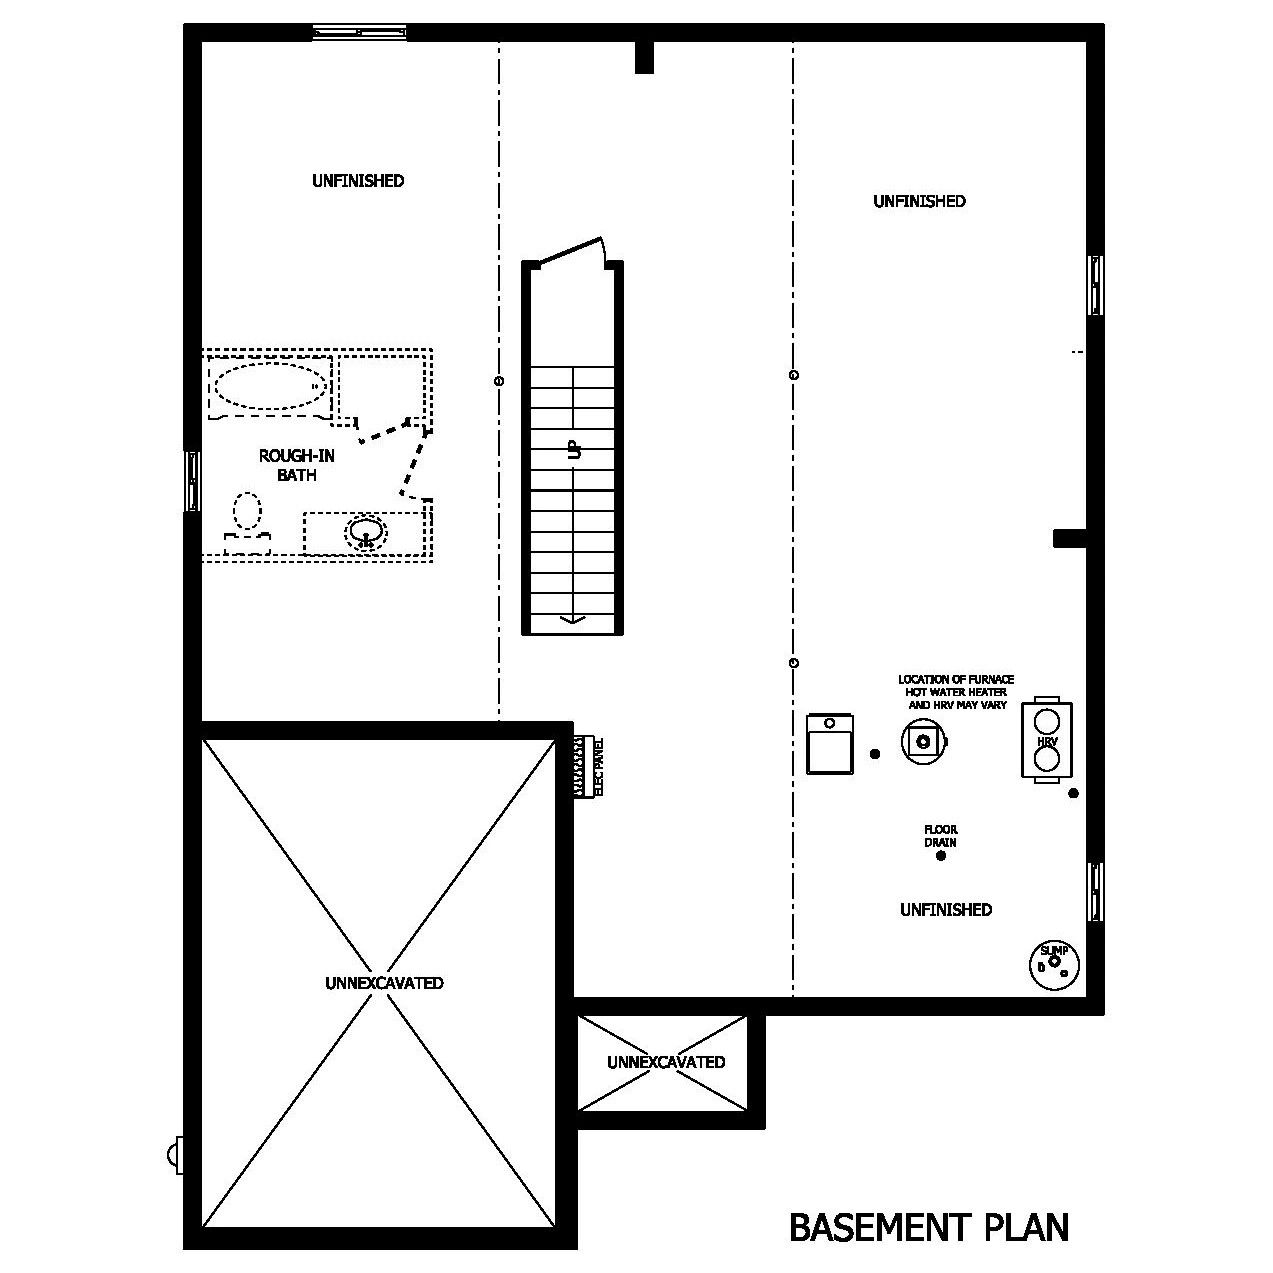 The Gibson Basement Plan
Greenwood Landings
New Homes in Coldwater